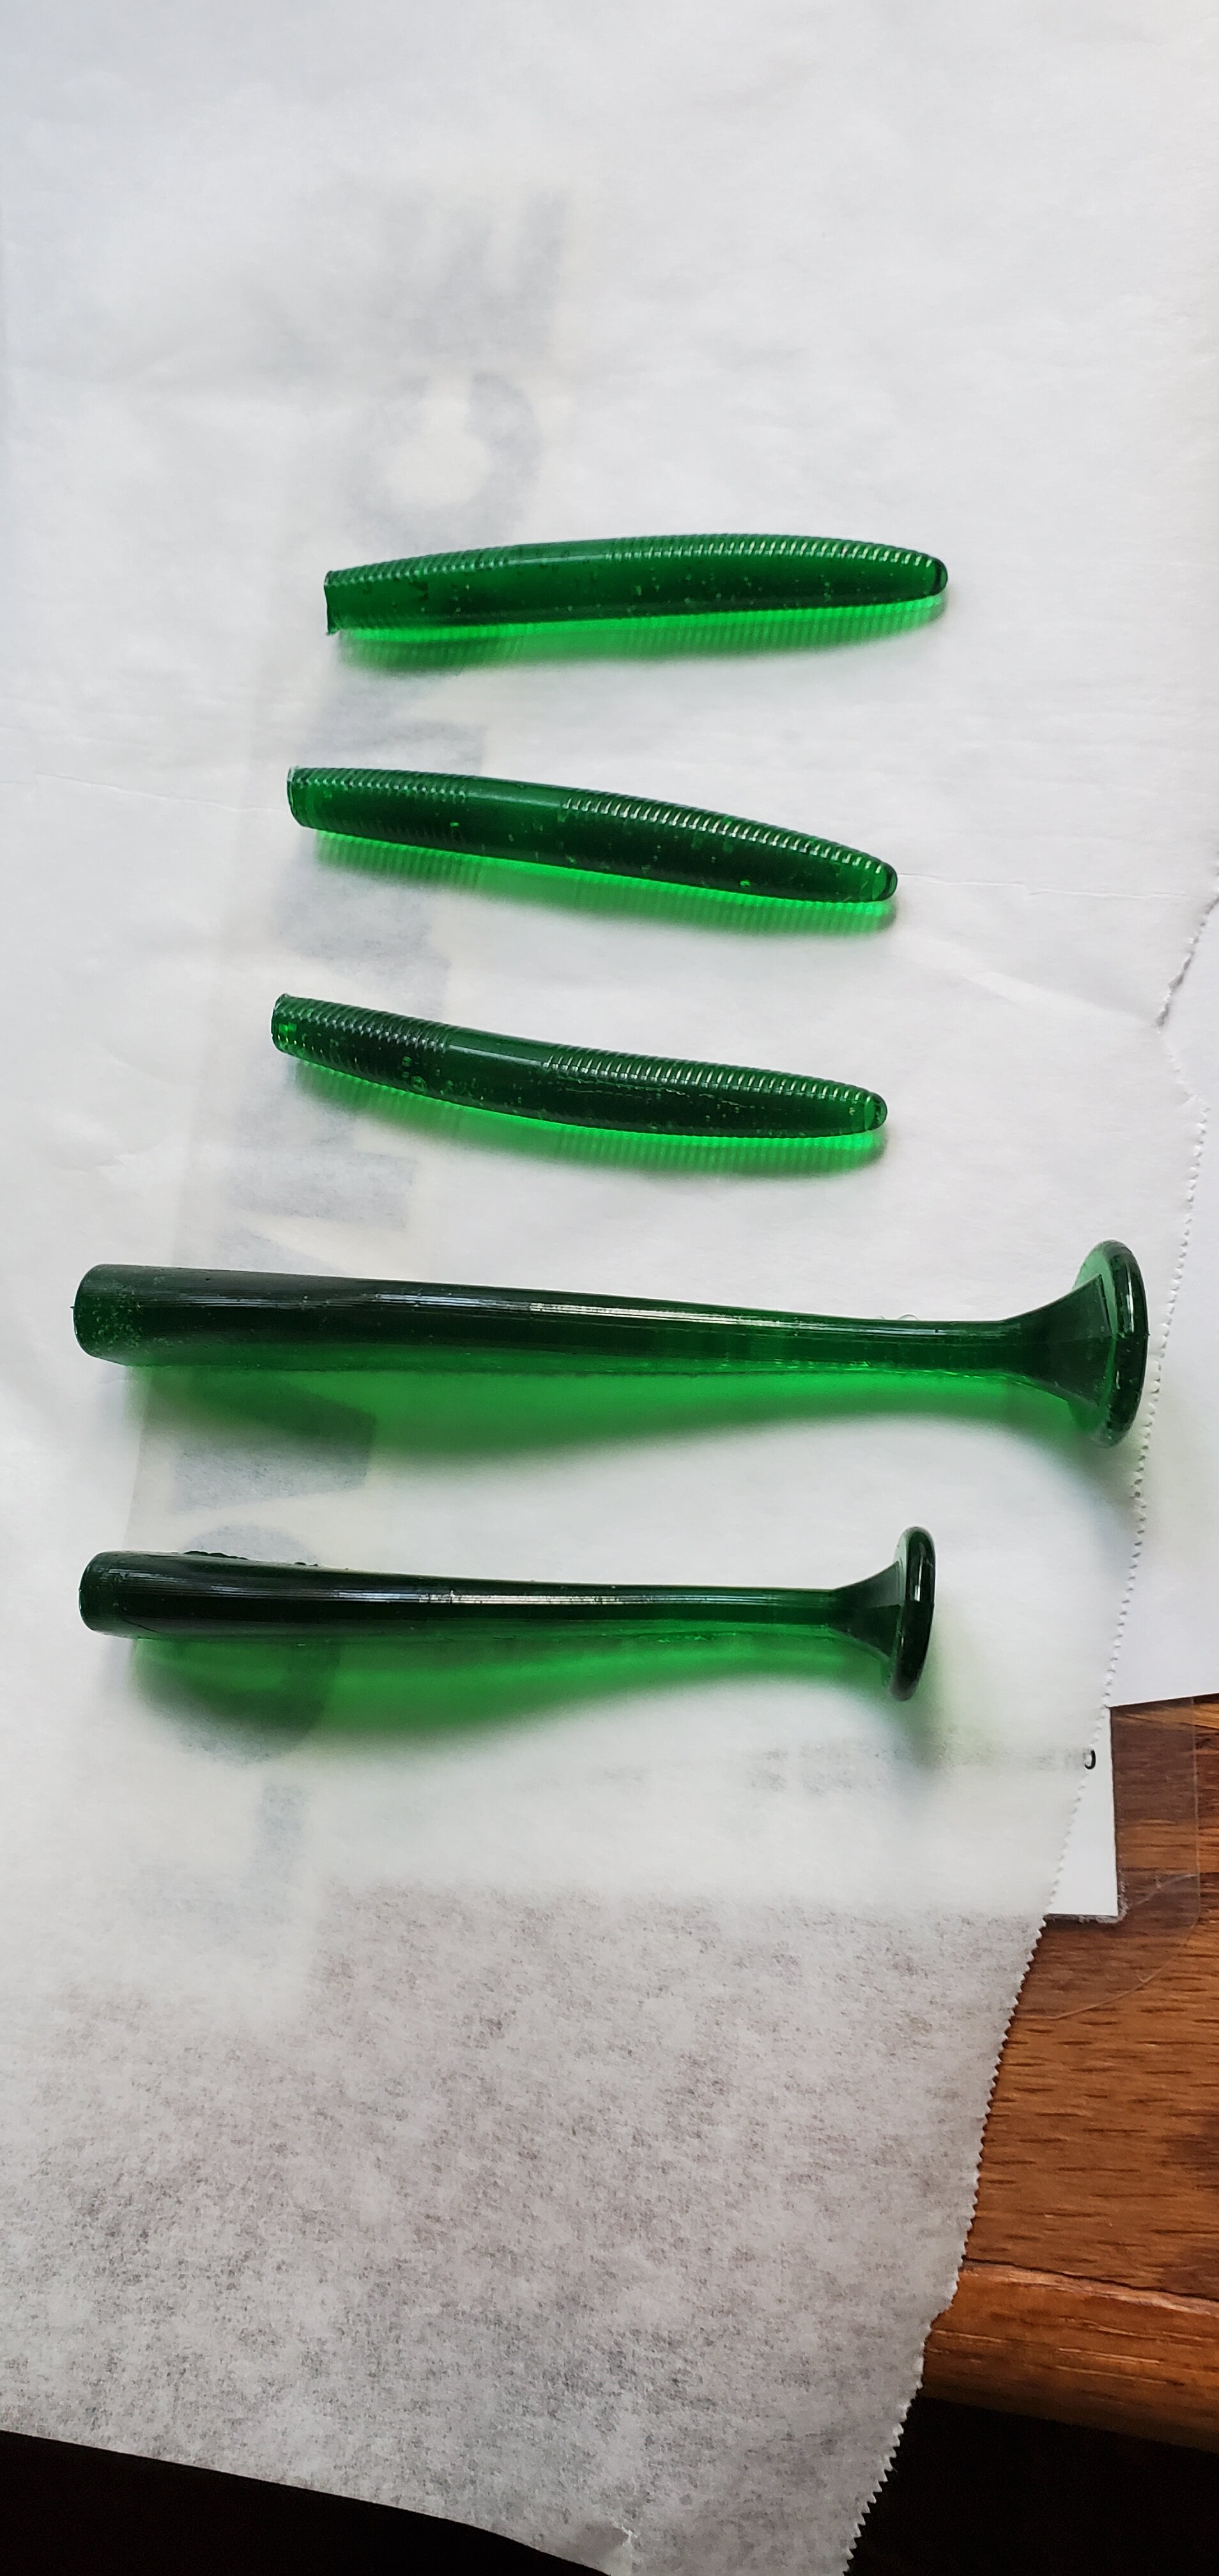 GitHub - seyDoggy/biopolymer-recipe: A biopolymer intended (initially) as a  replacement for PVC (plastisol) in the creation of soft plastic fishing  baits.